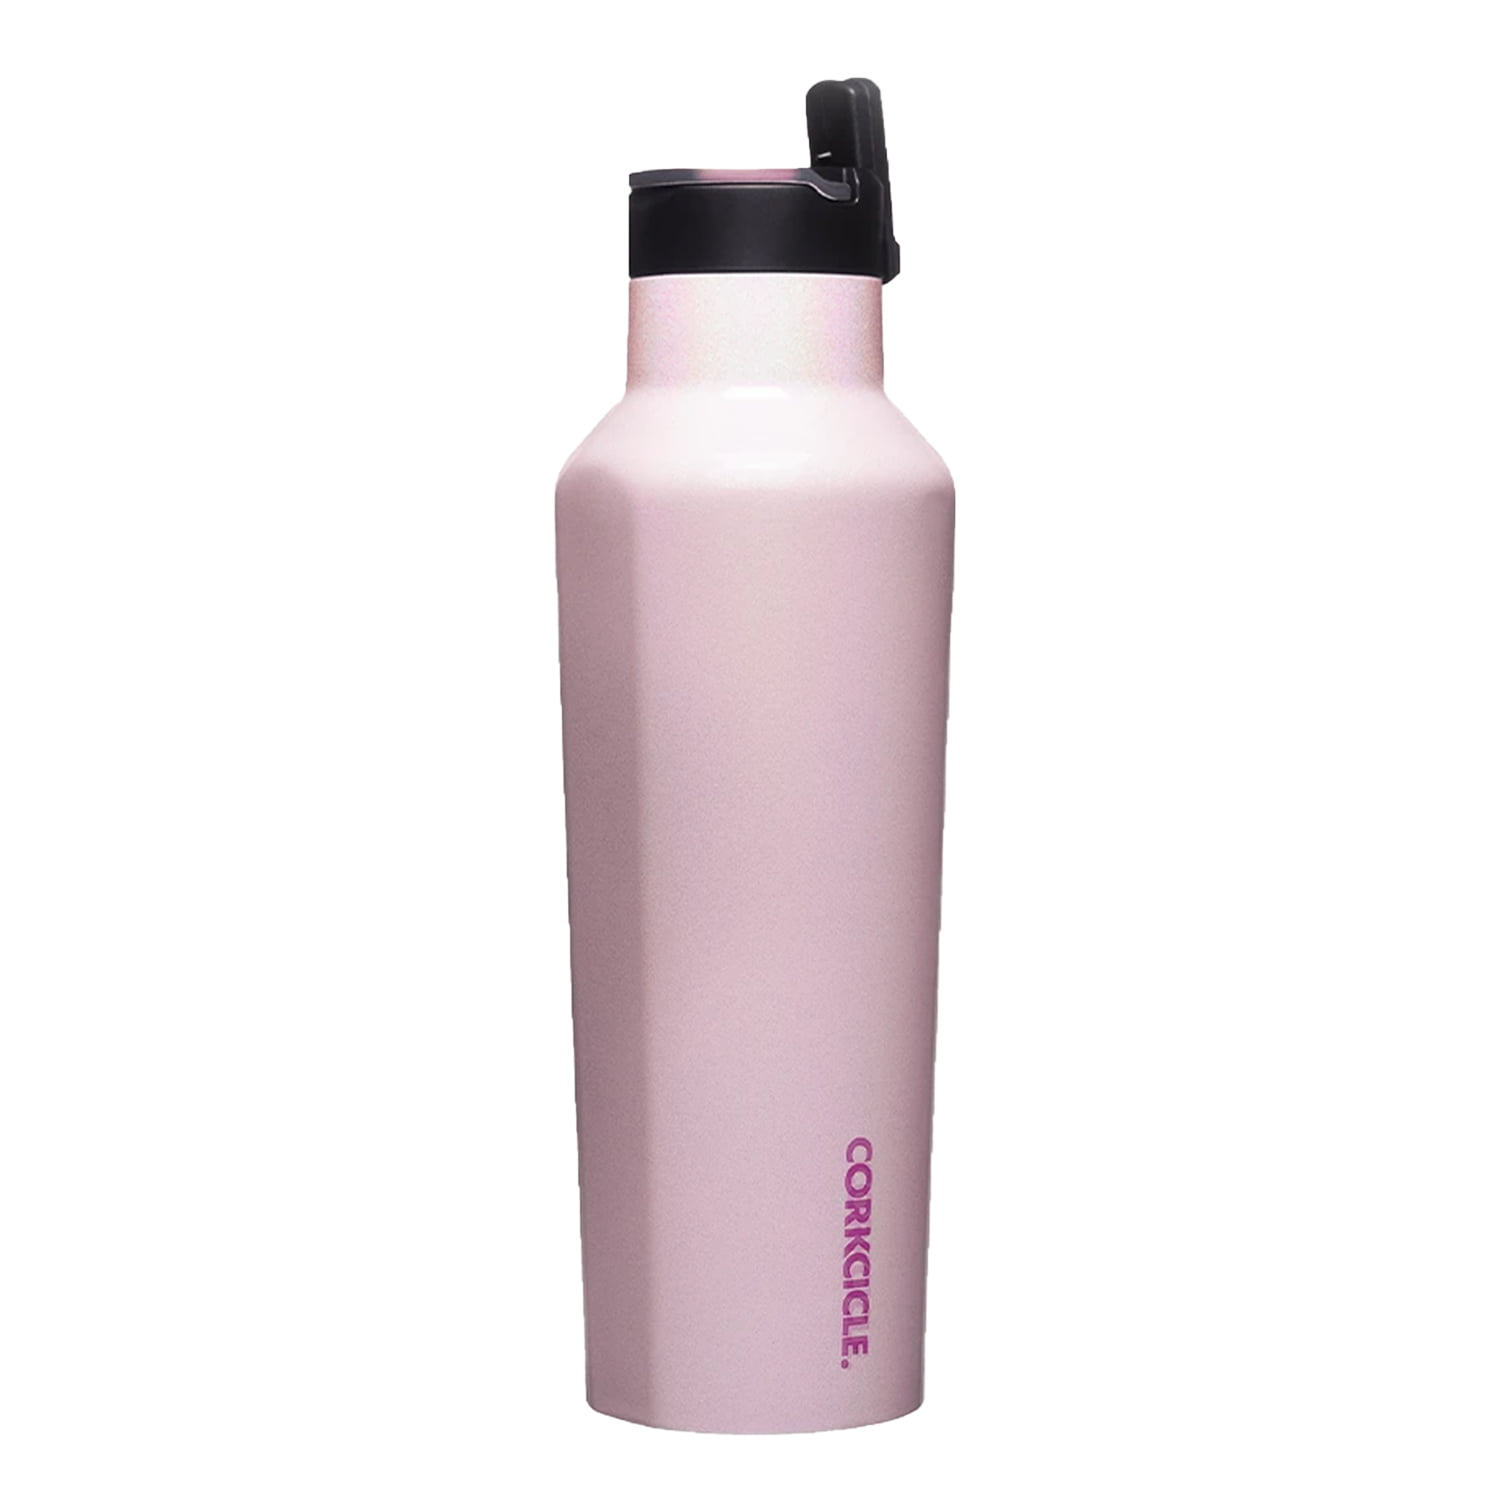 Corkcicle Canteen Insulated Stainless Steel Water Bottle Flask 25oz Aurora NEW 